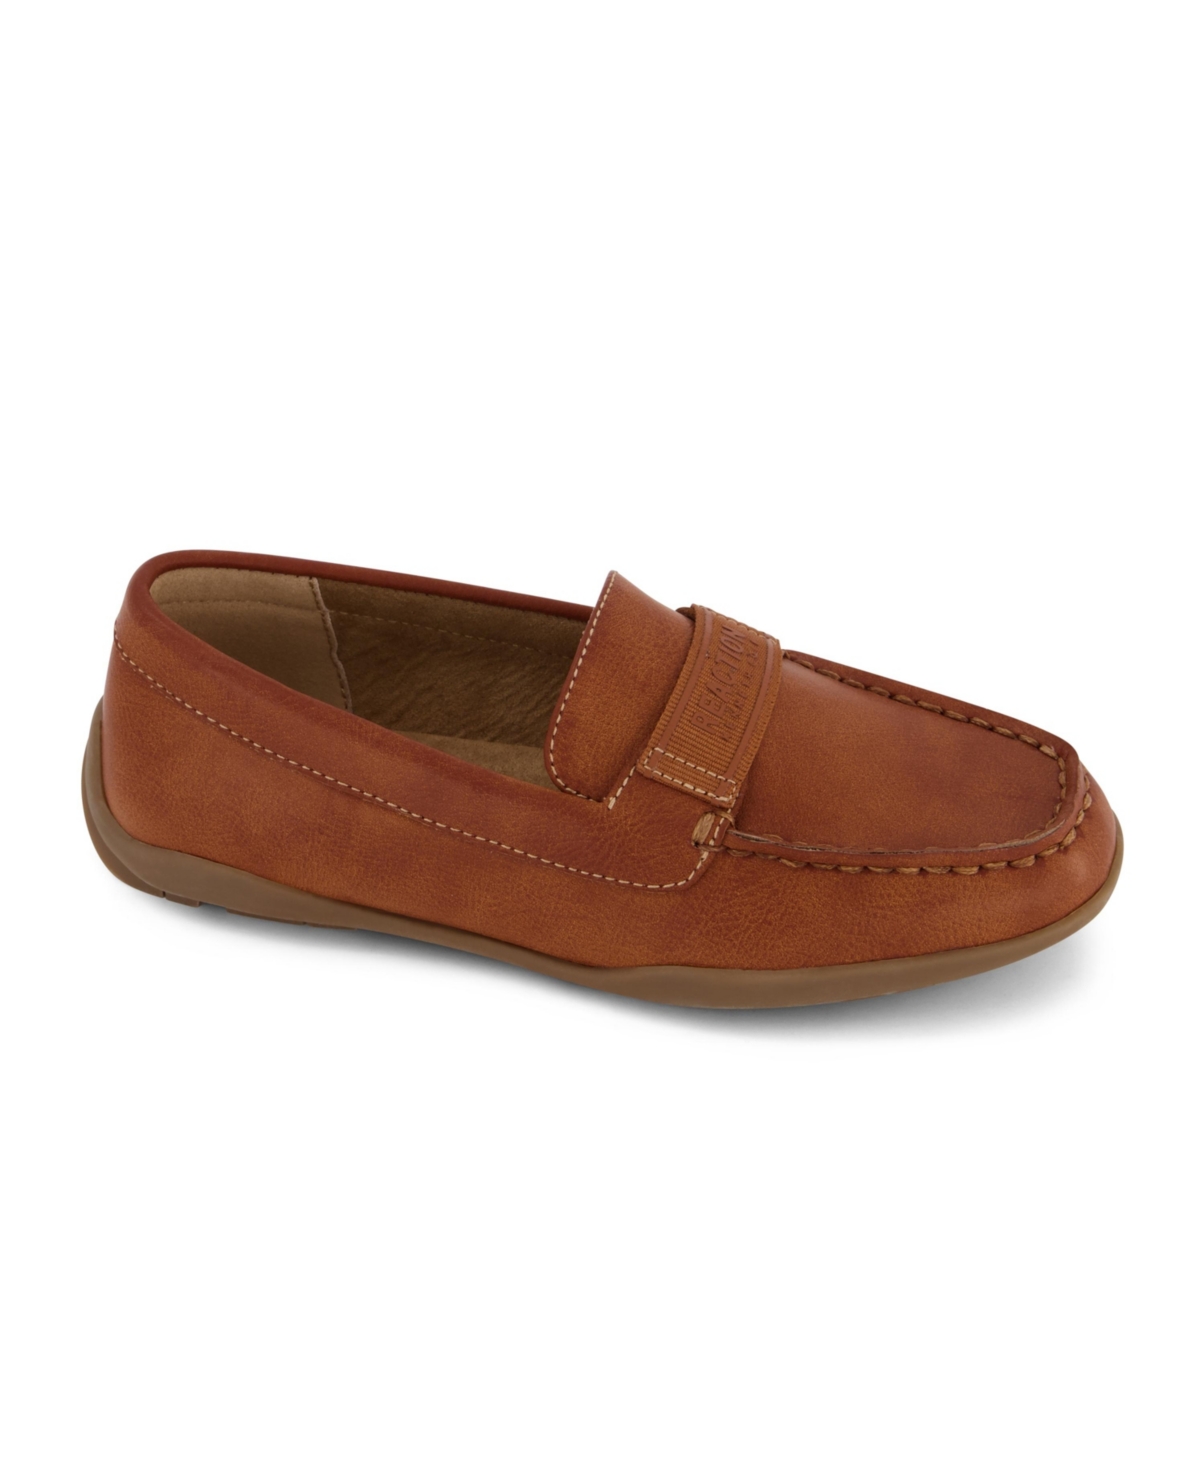 KENNETH COLE NEW YORK TODDLER BOYS DRESS MOCCASIN